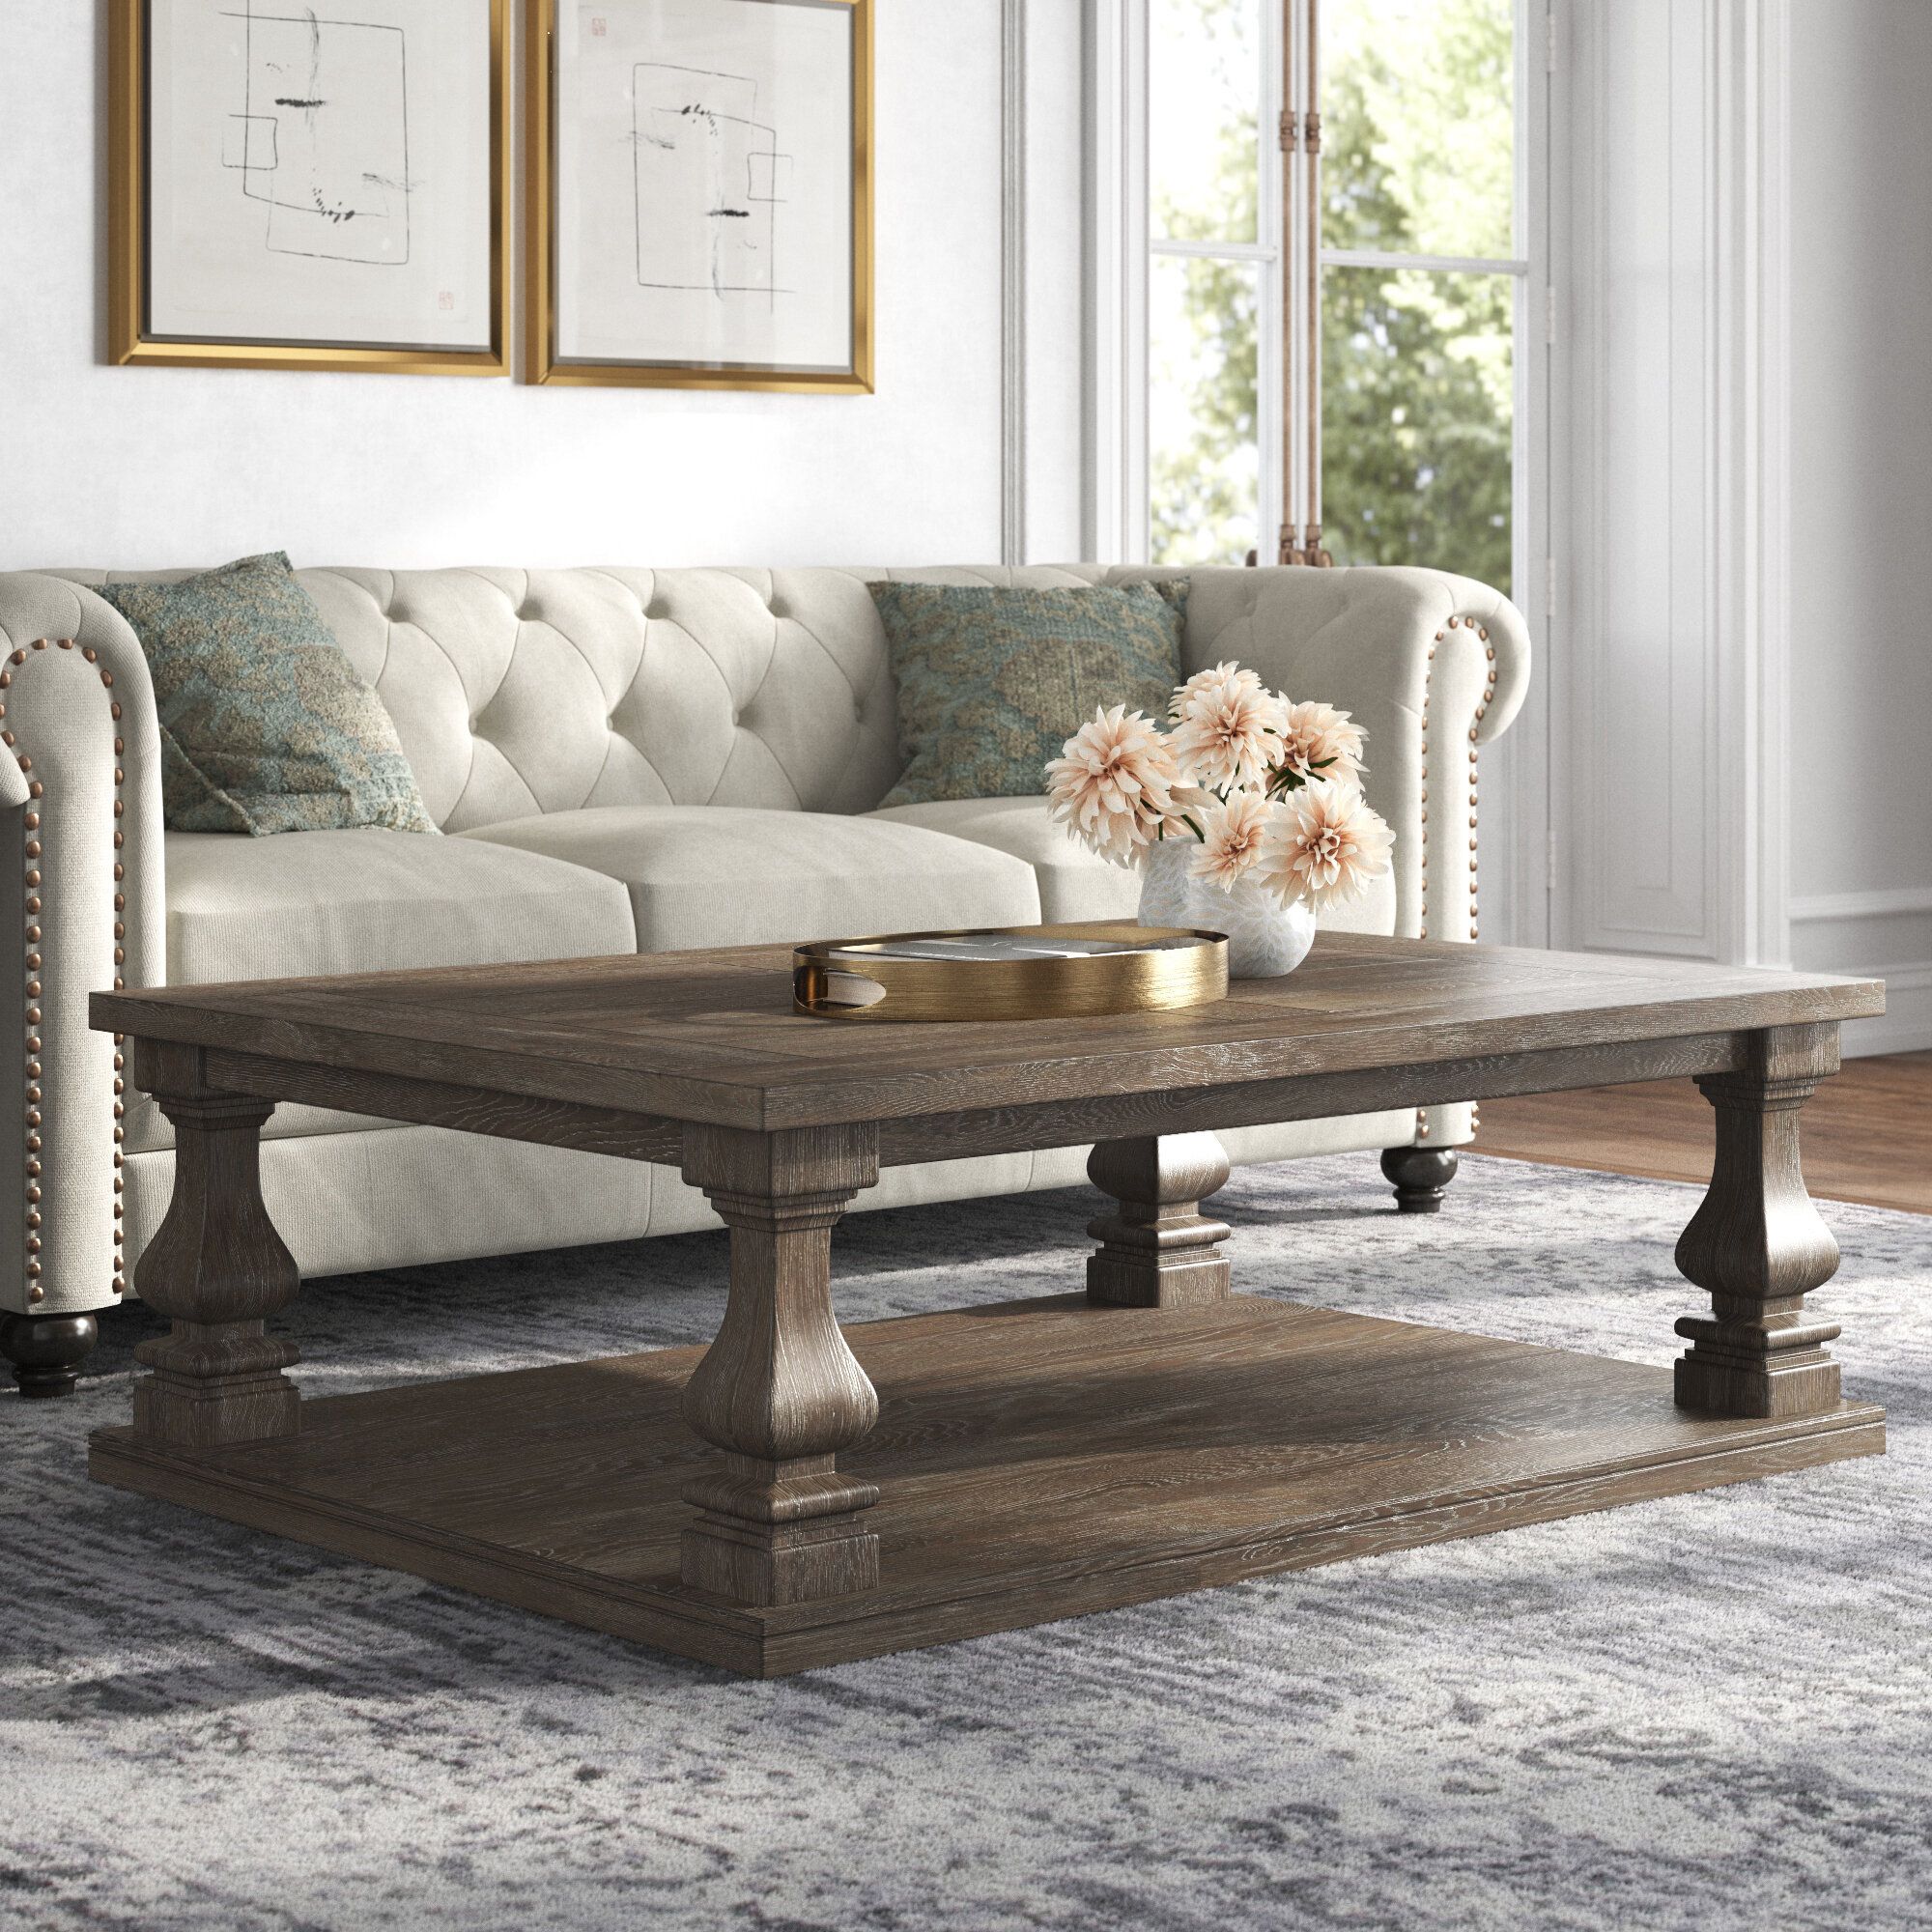 Kelly Clarkson Home Briana Floor Shelf Coffee Table & Reviews | Wayfair In Coffee Tables With Shelf (Gallery 19 of 20)